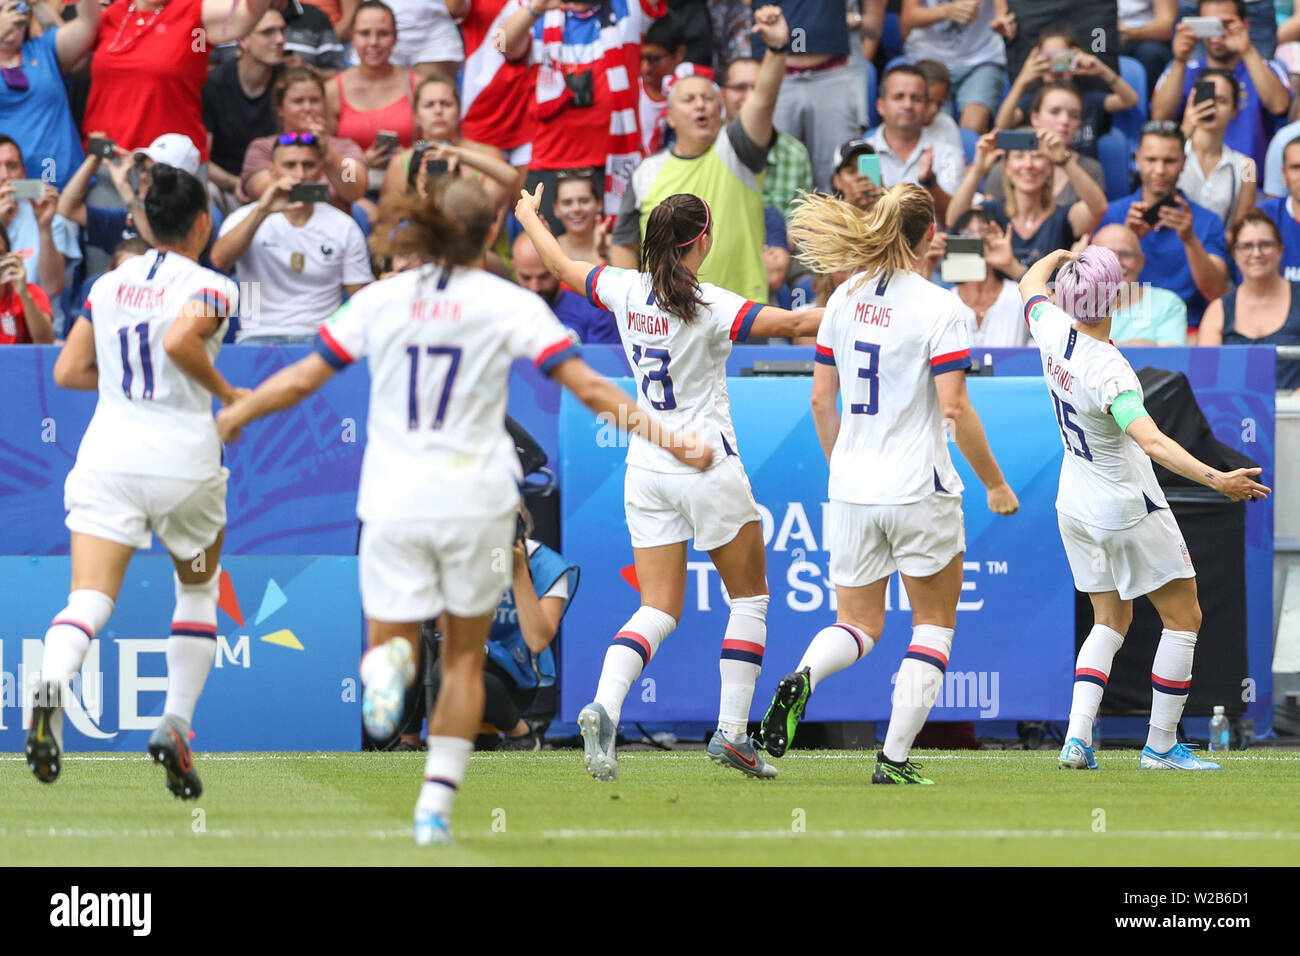 Lyon, France. 07th July, 2019. Rapinoe the United States during match against the Netherlands game valid for the Final of the Women 's Soccer World Cup in Lyon in France this Sunday, 07. Credit: Brazil Photo Press/Alamy Live News Stock Photo